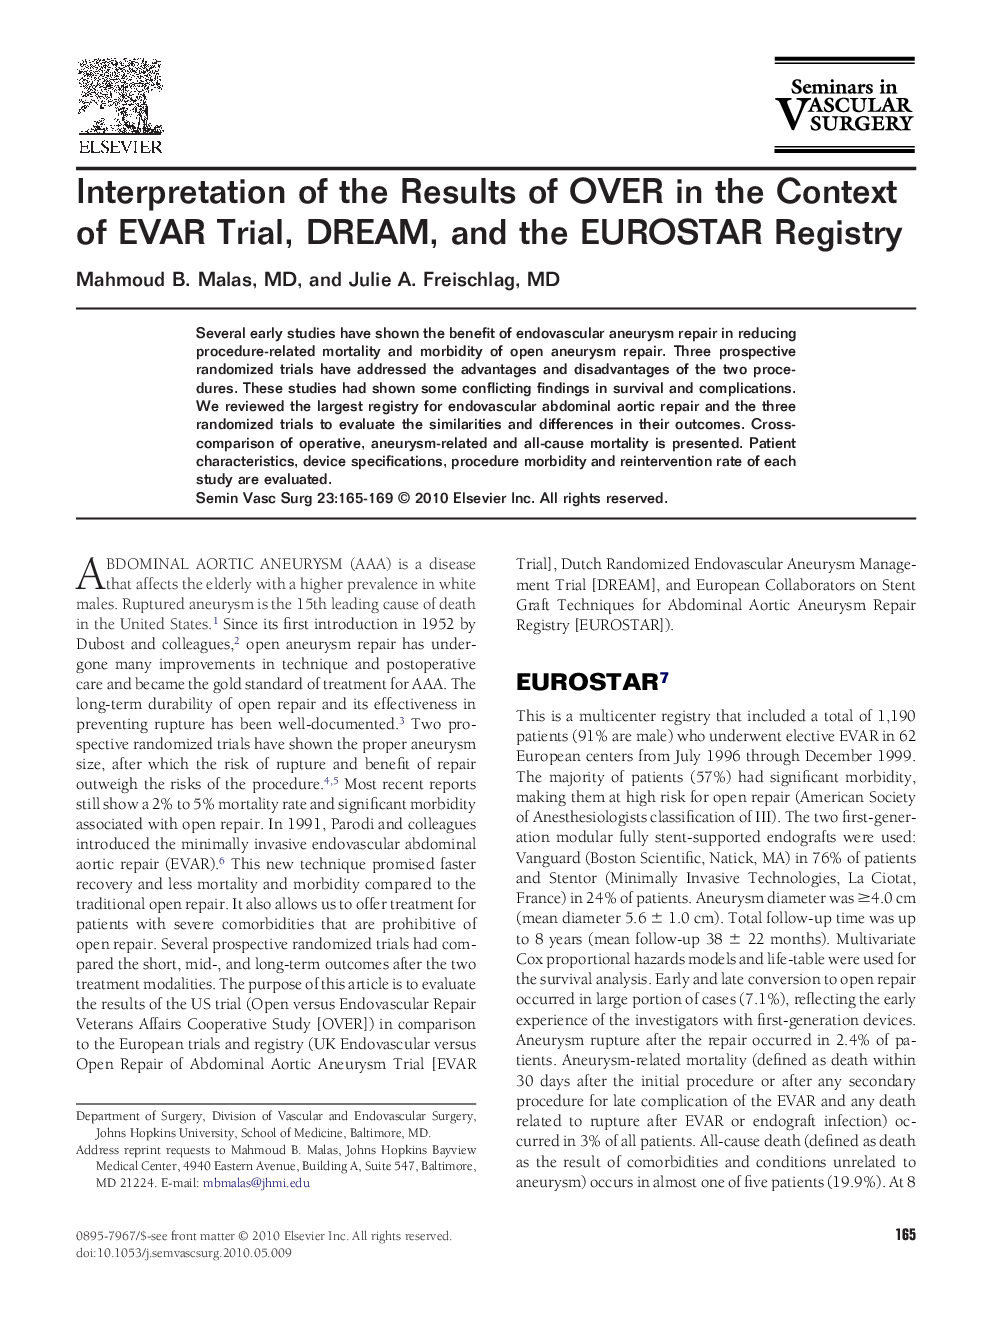 Interpretation of the Results of OVER in the Context of EVAR Trial, DREAM, and the EUROSTAR Registry